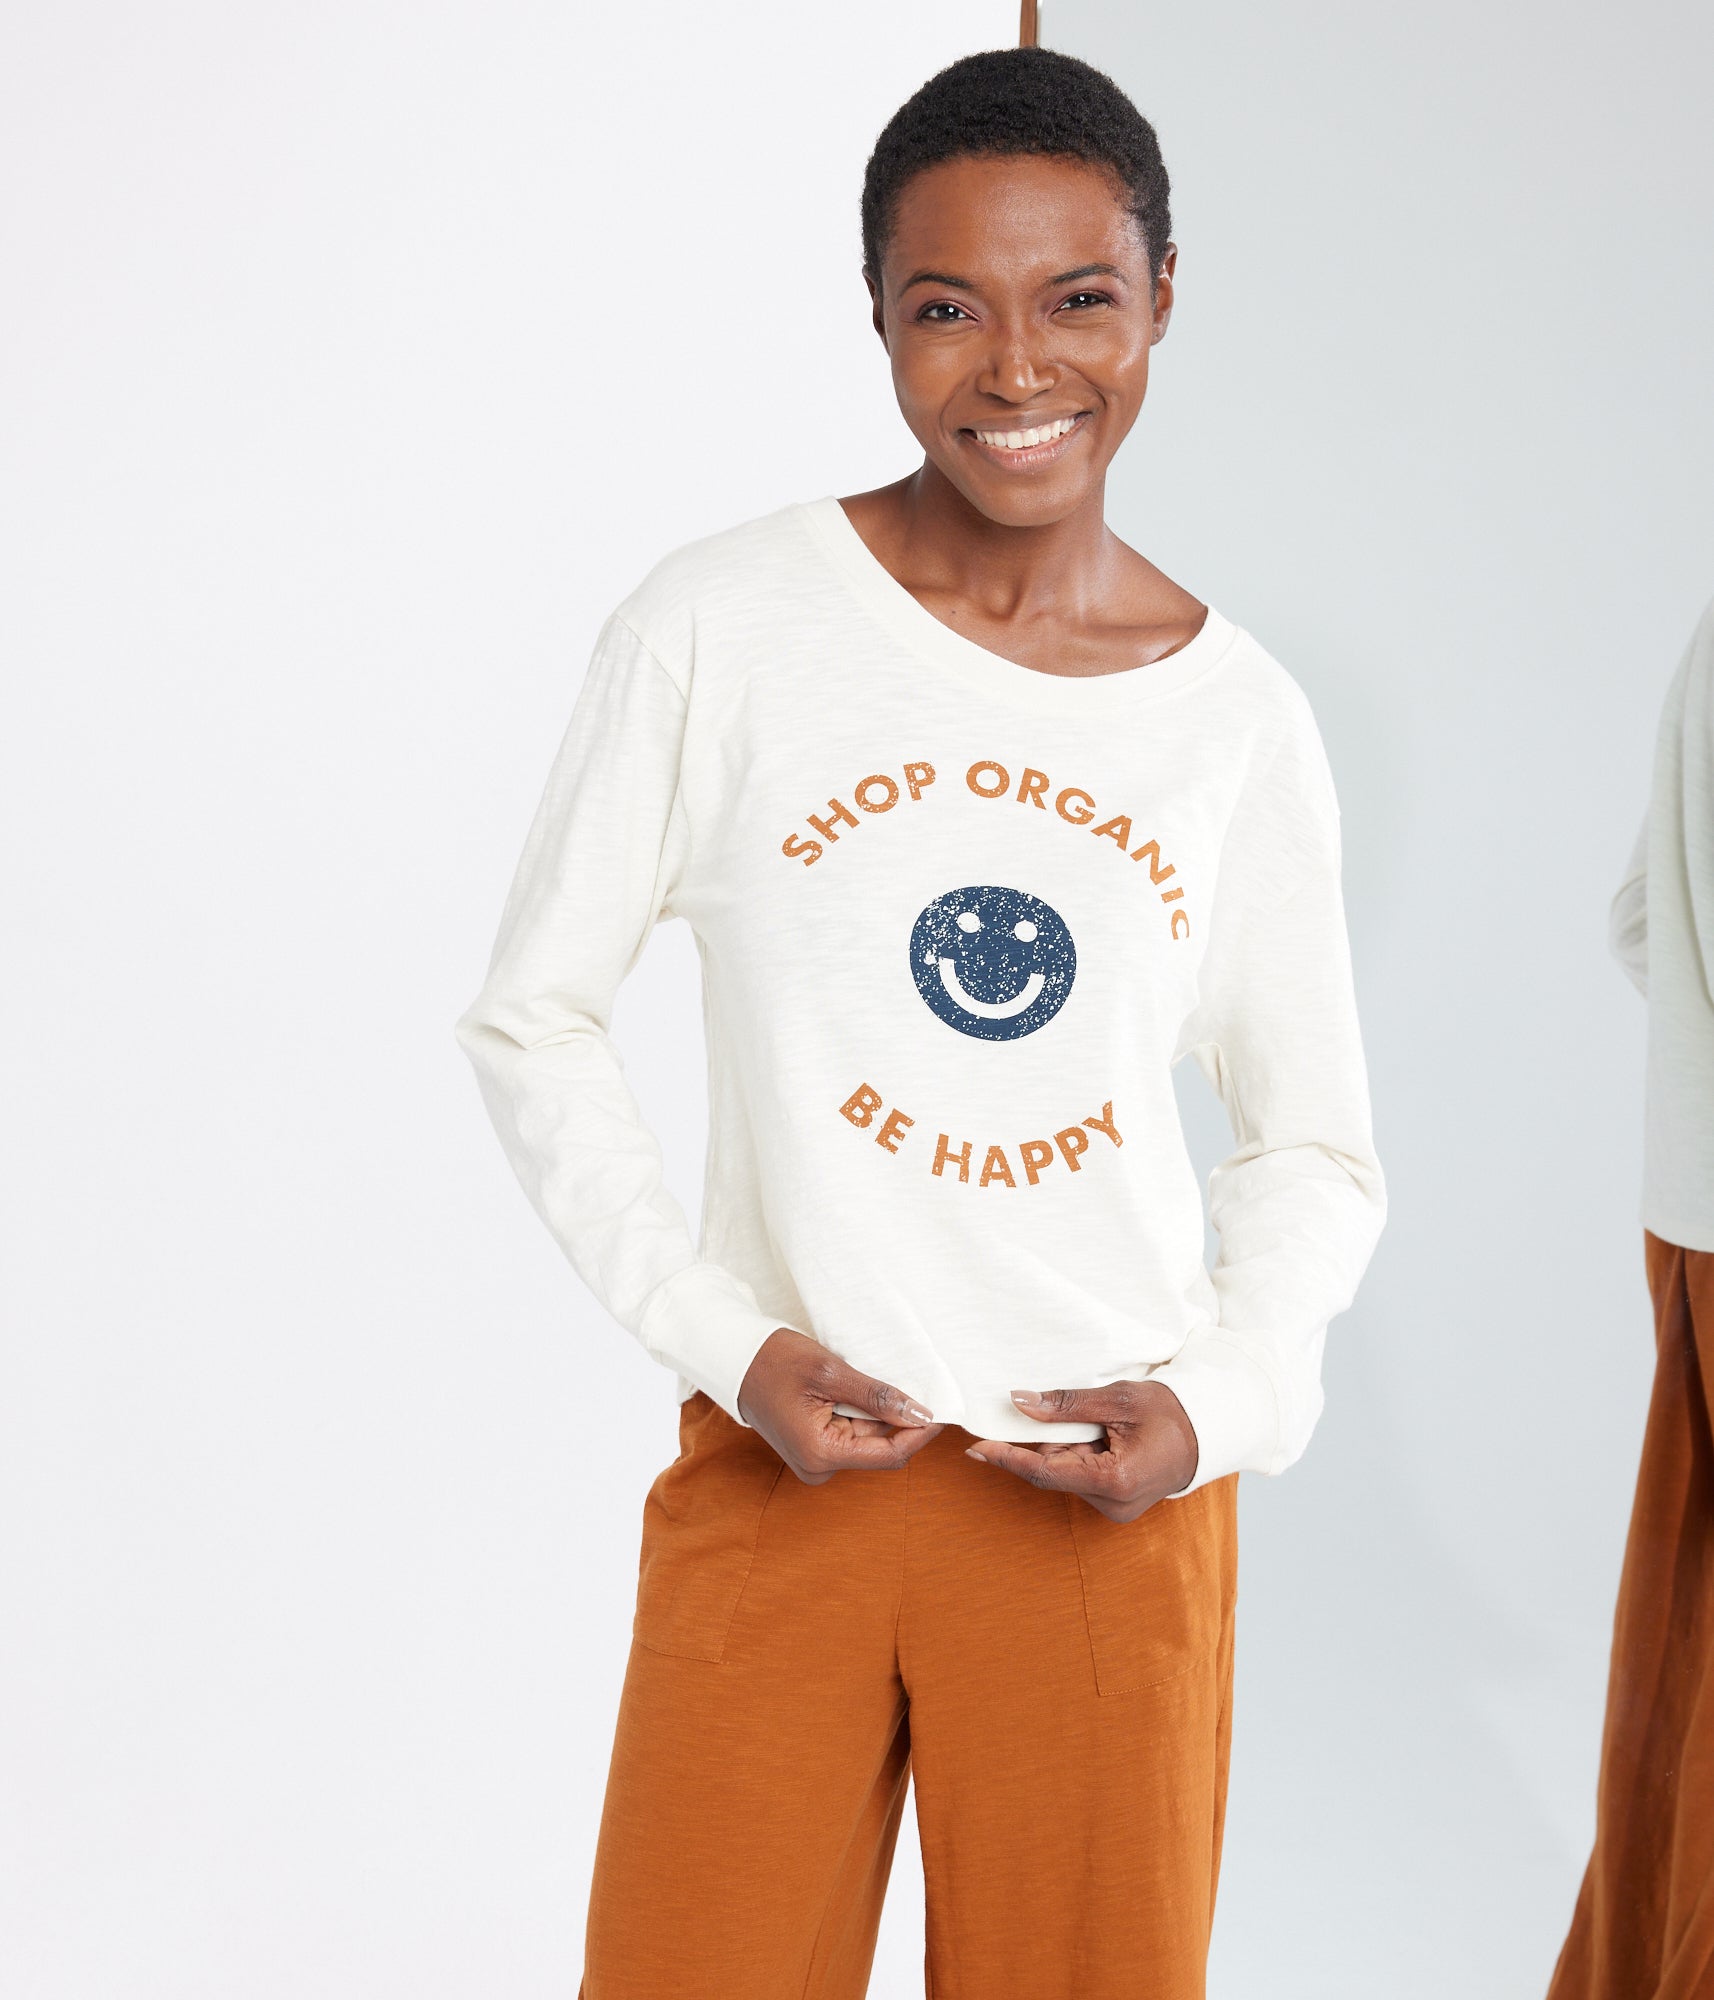 Shop Organic and Be Happy Tee